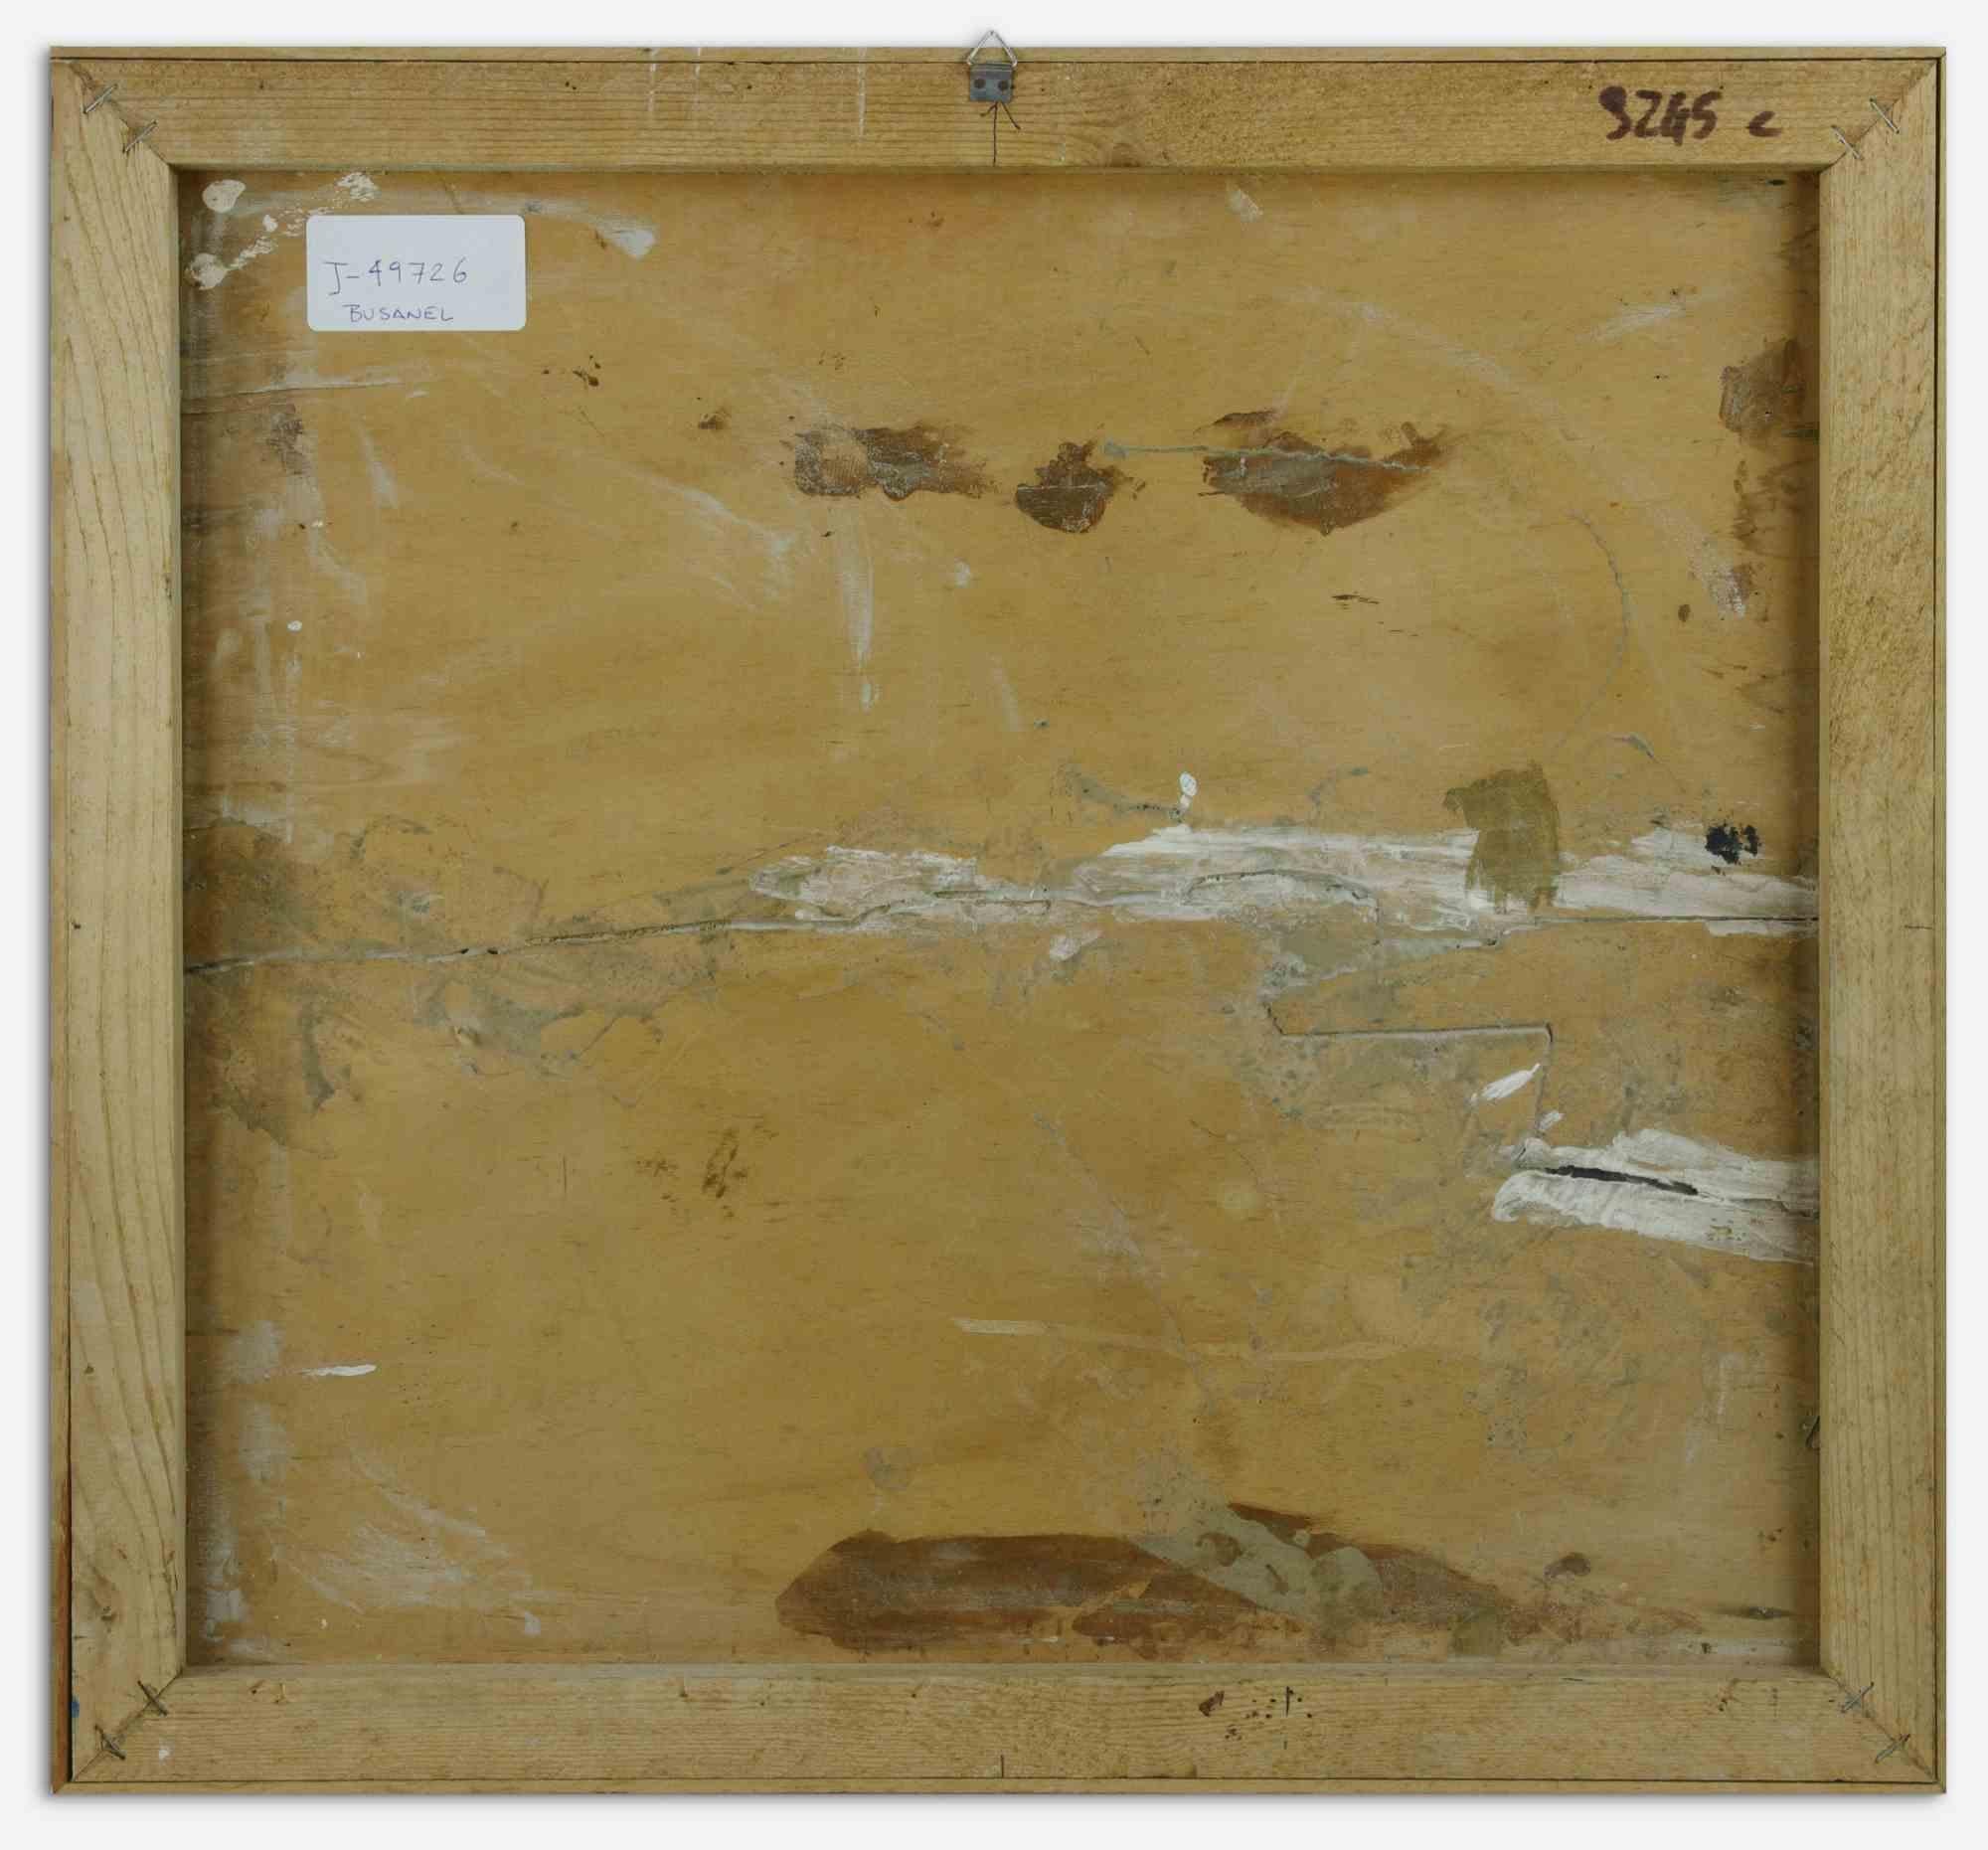 Voile N.3 is an original artwork realized by the Italian contemporary artist Marisa Busanel (1933-1990) in 1968.

Mixed media artwork on panel (collage and painting).
